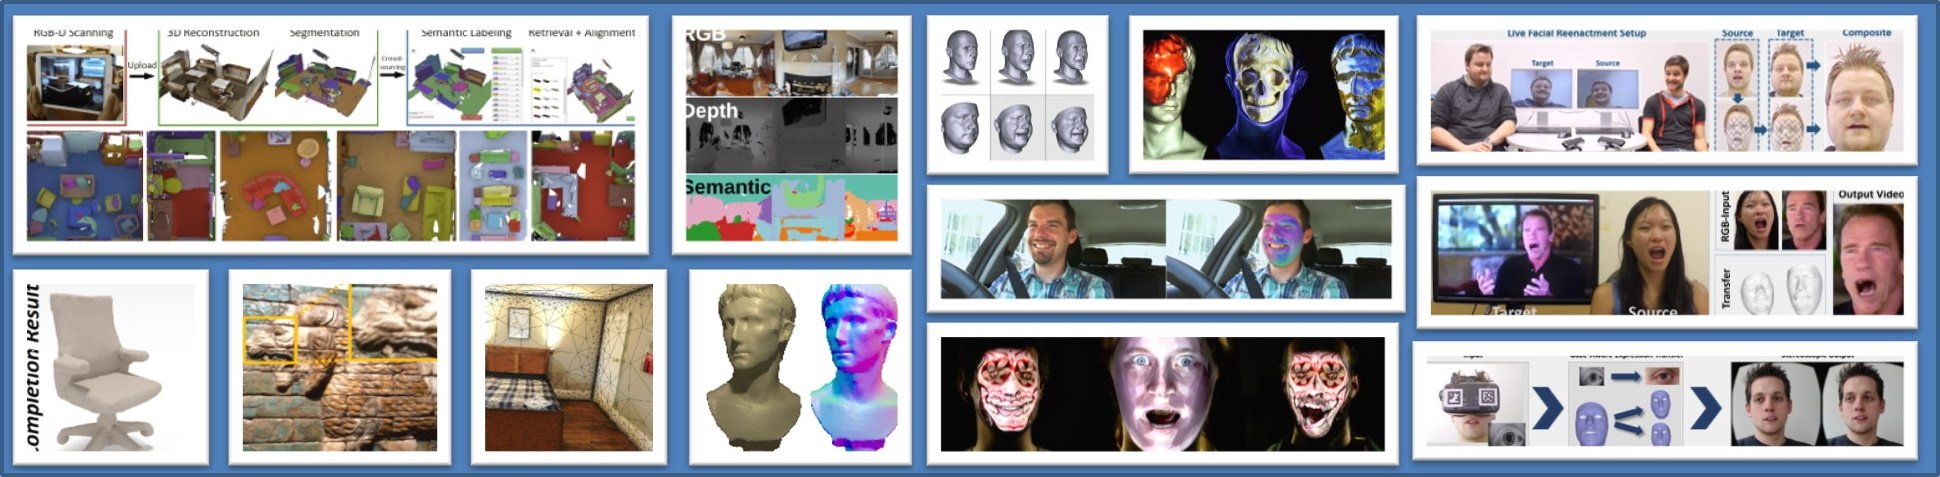 Lecture: 3D Scanning and Motion Capture